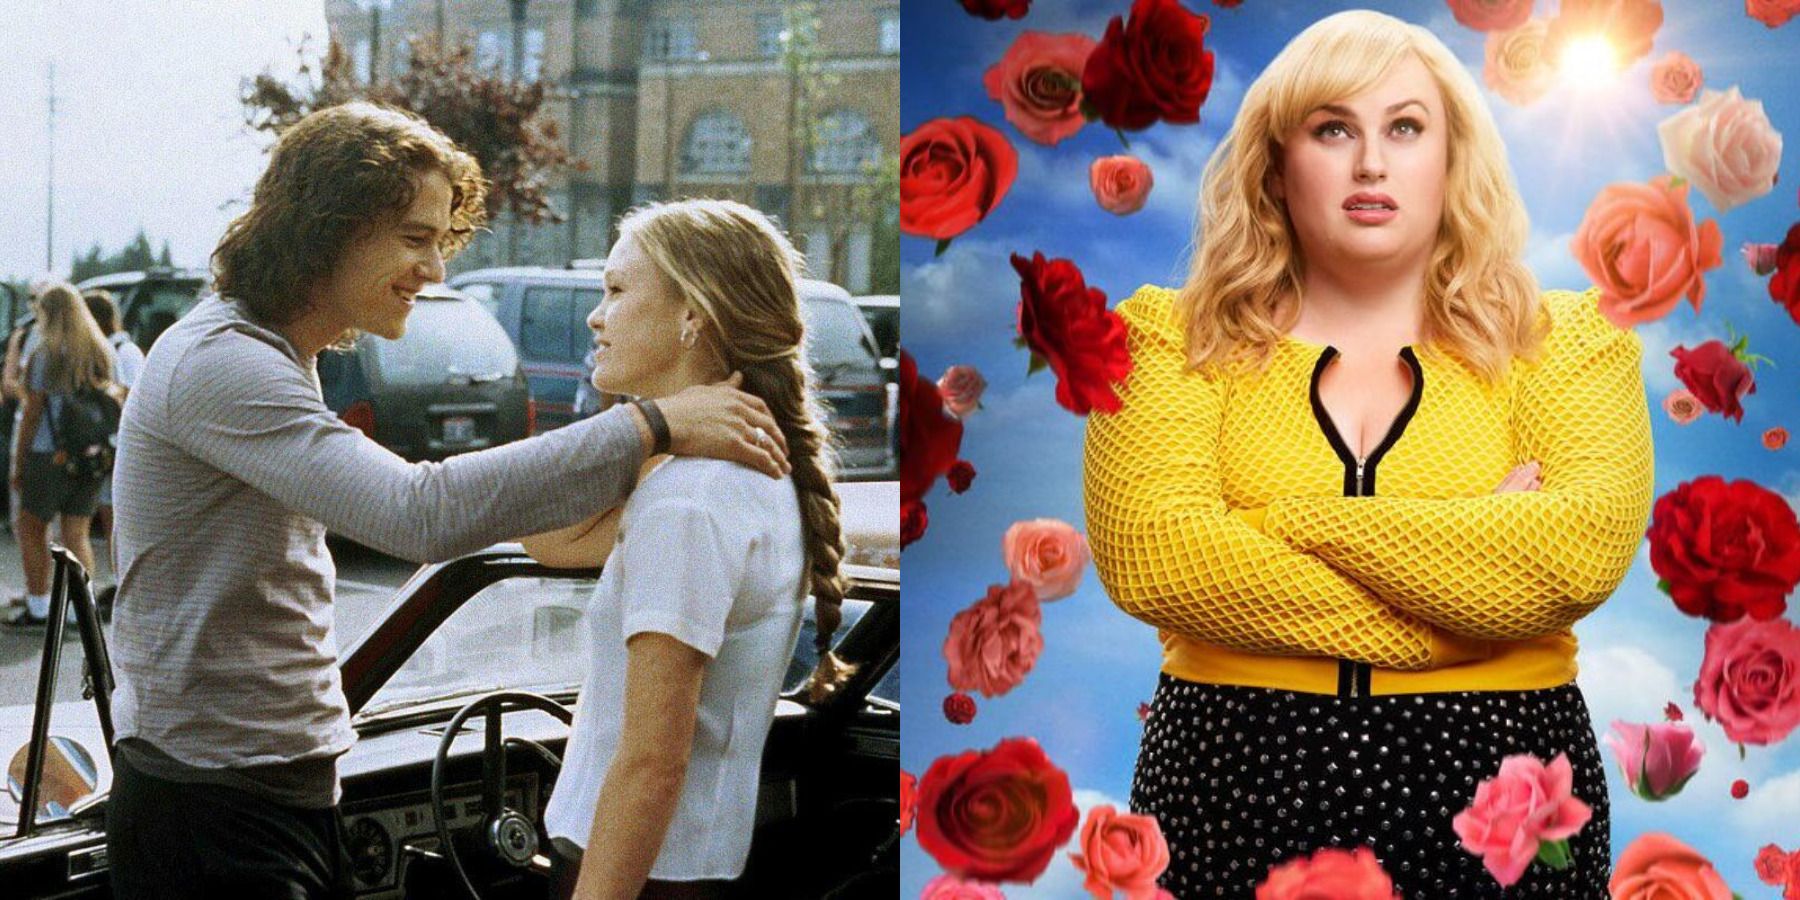 Best Valentine's Day movies for cynical romantics feature split image 10 Things I Hate About You and Isn't It Romantic